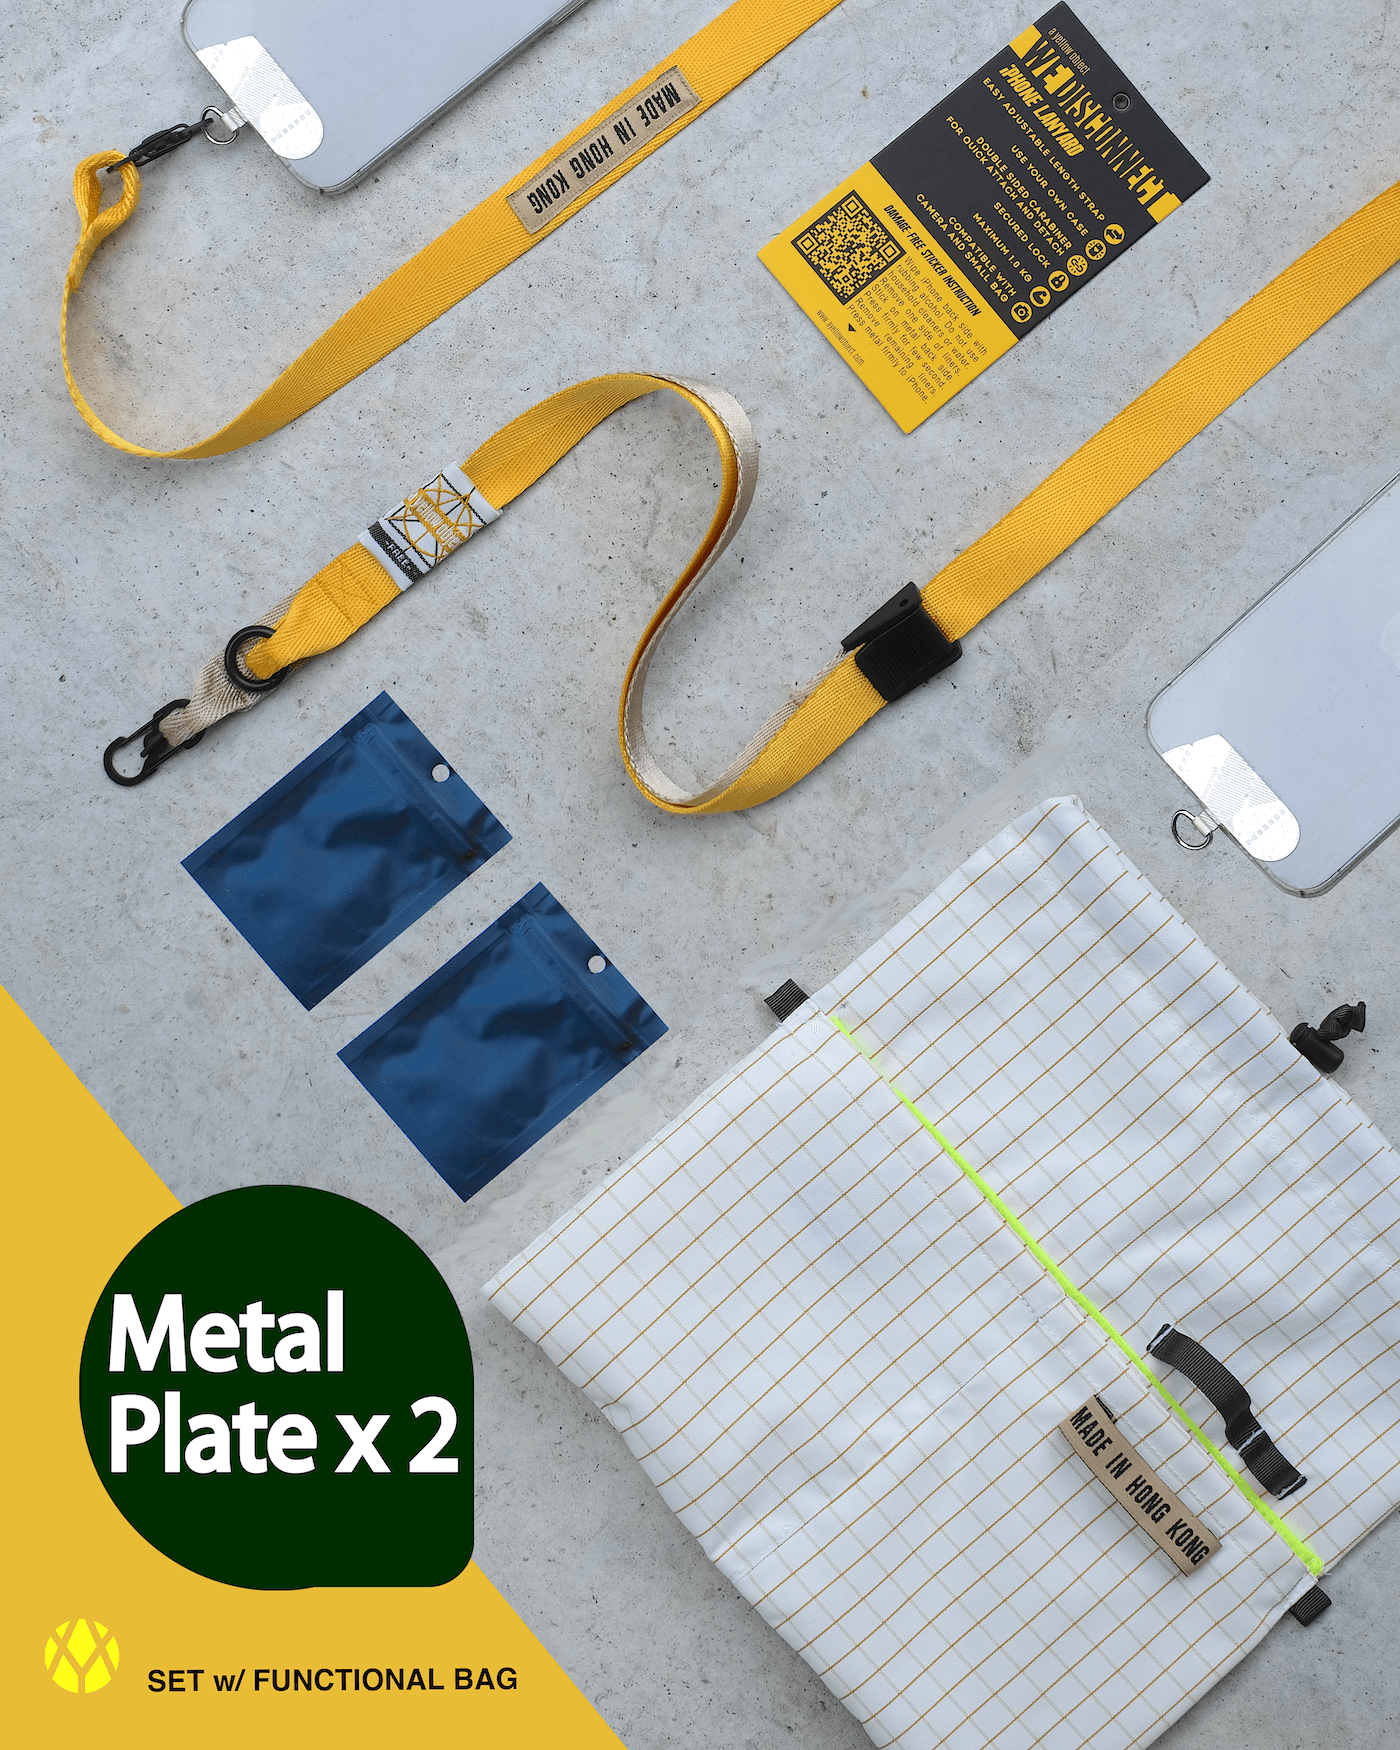 We Disconnect 2.0 Phone Lanyard (Yellow) - Metal Plate x 2 - a yellow object